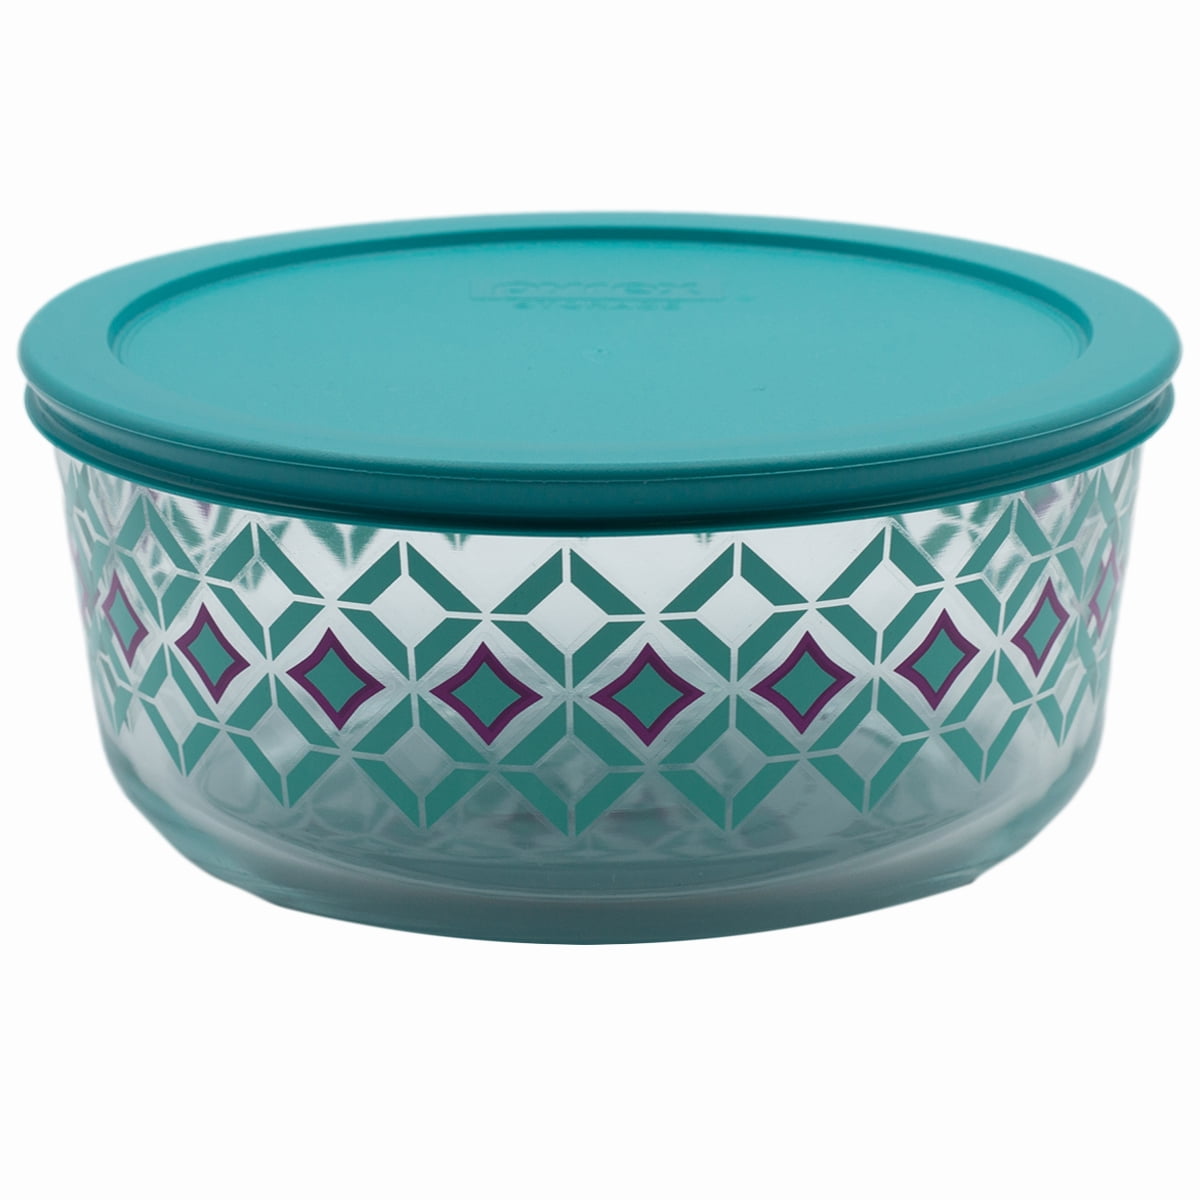 Glass lunch containers - Pyrex® Webshop EU